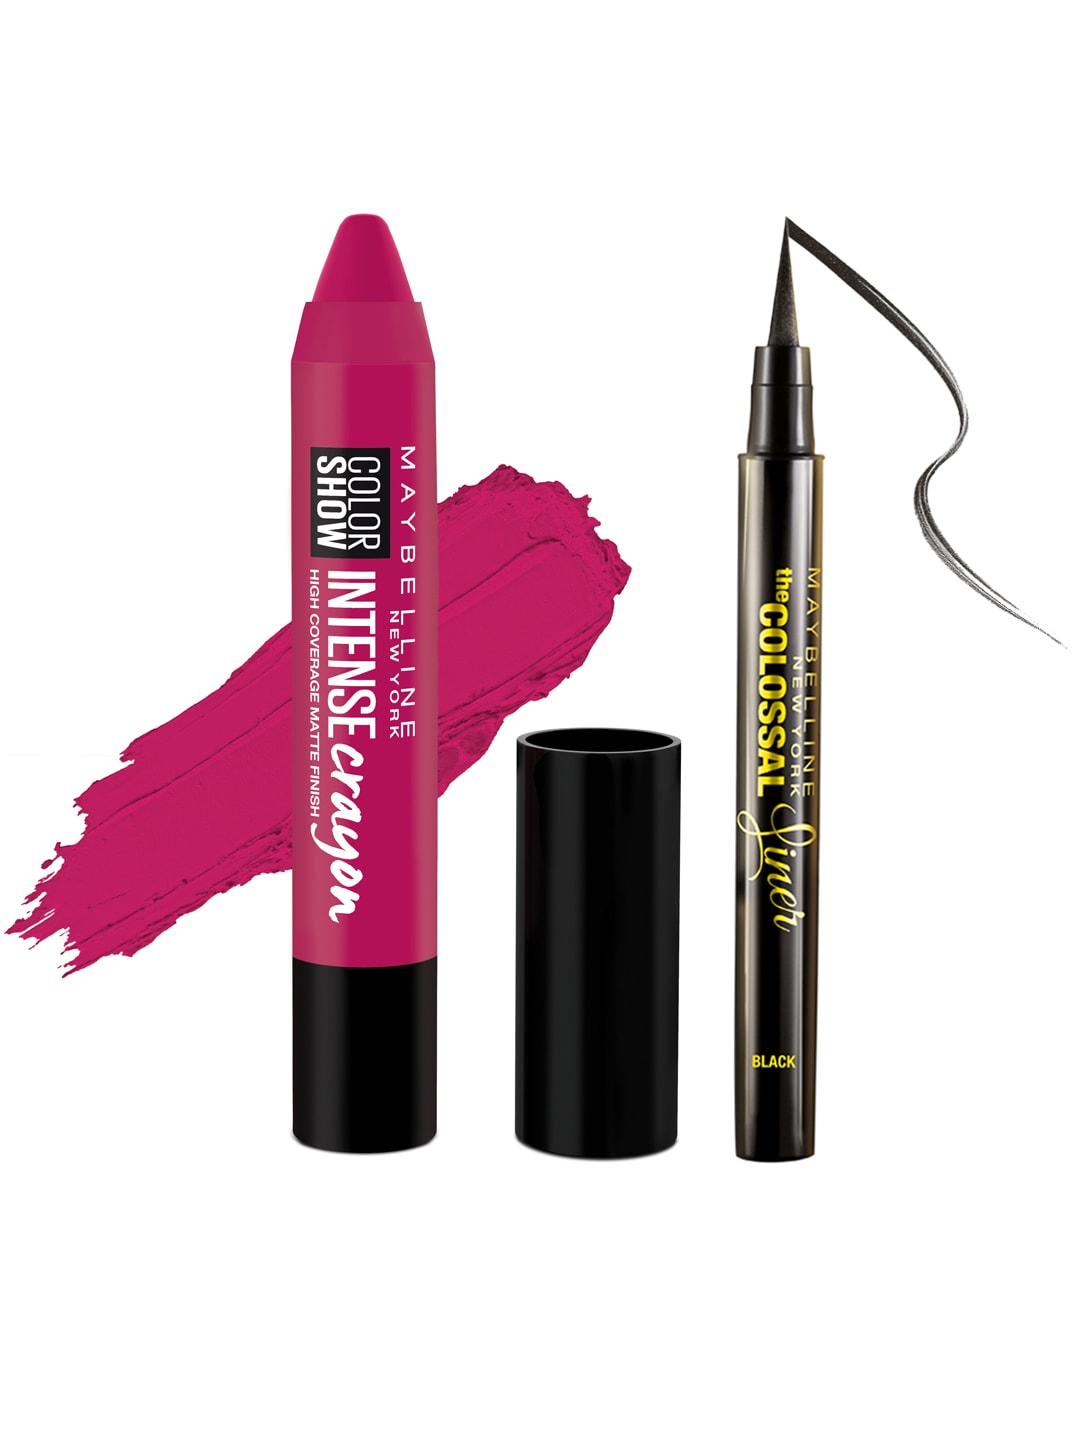 Maybelline The Colossal Eye Liner & Color Show Intense Crayon Fierce Fuchsia Lip Crayon Price in India